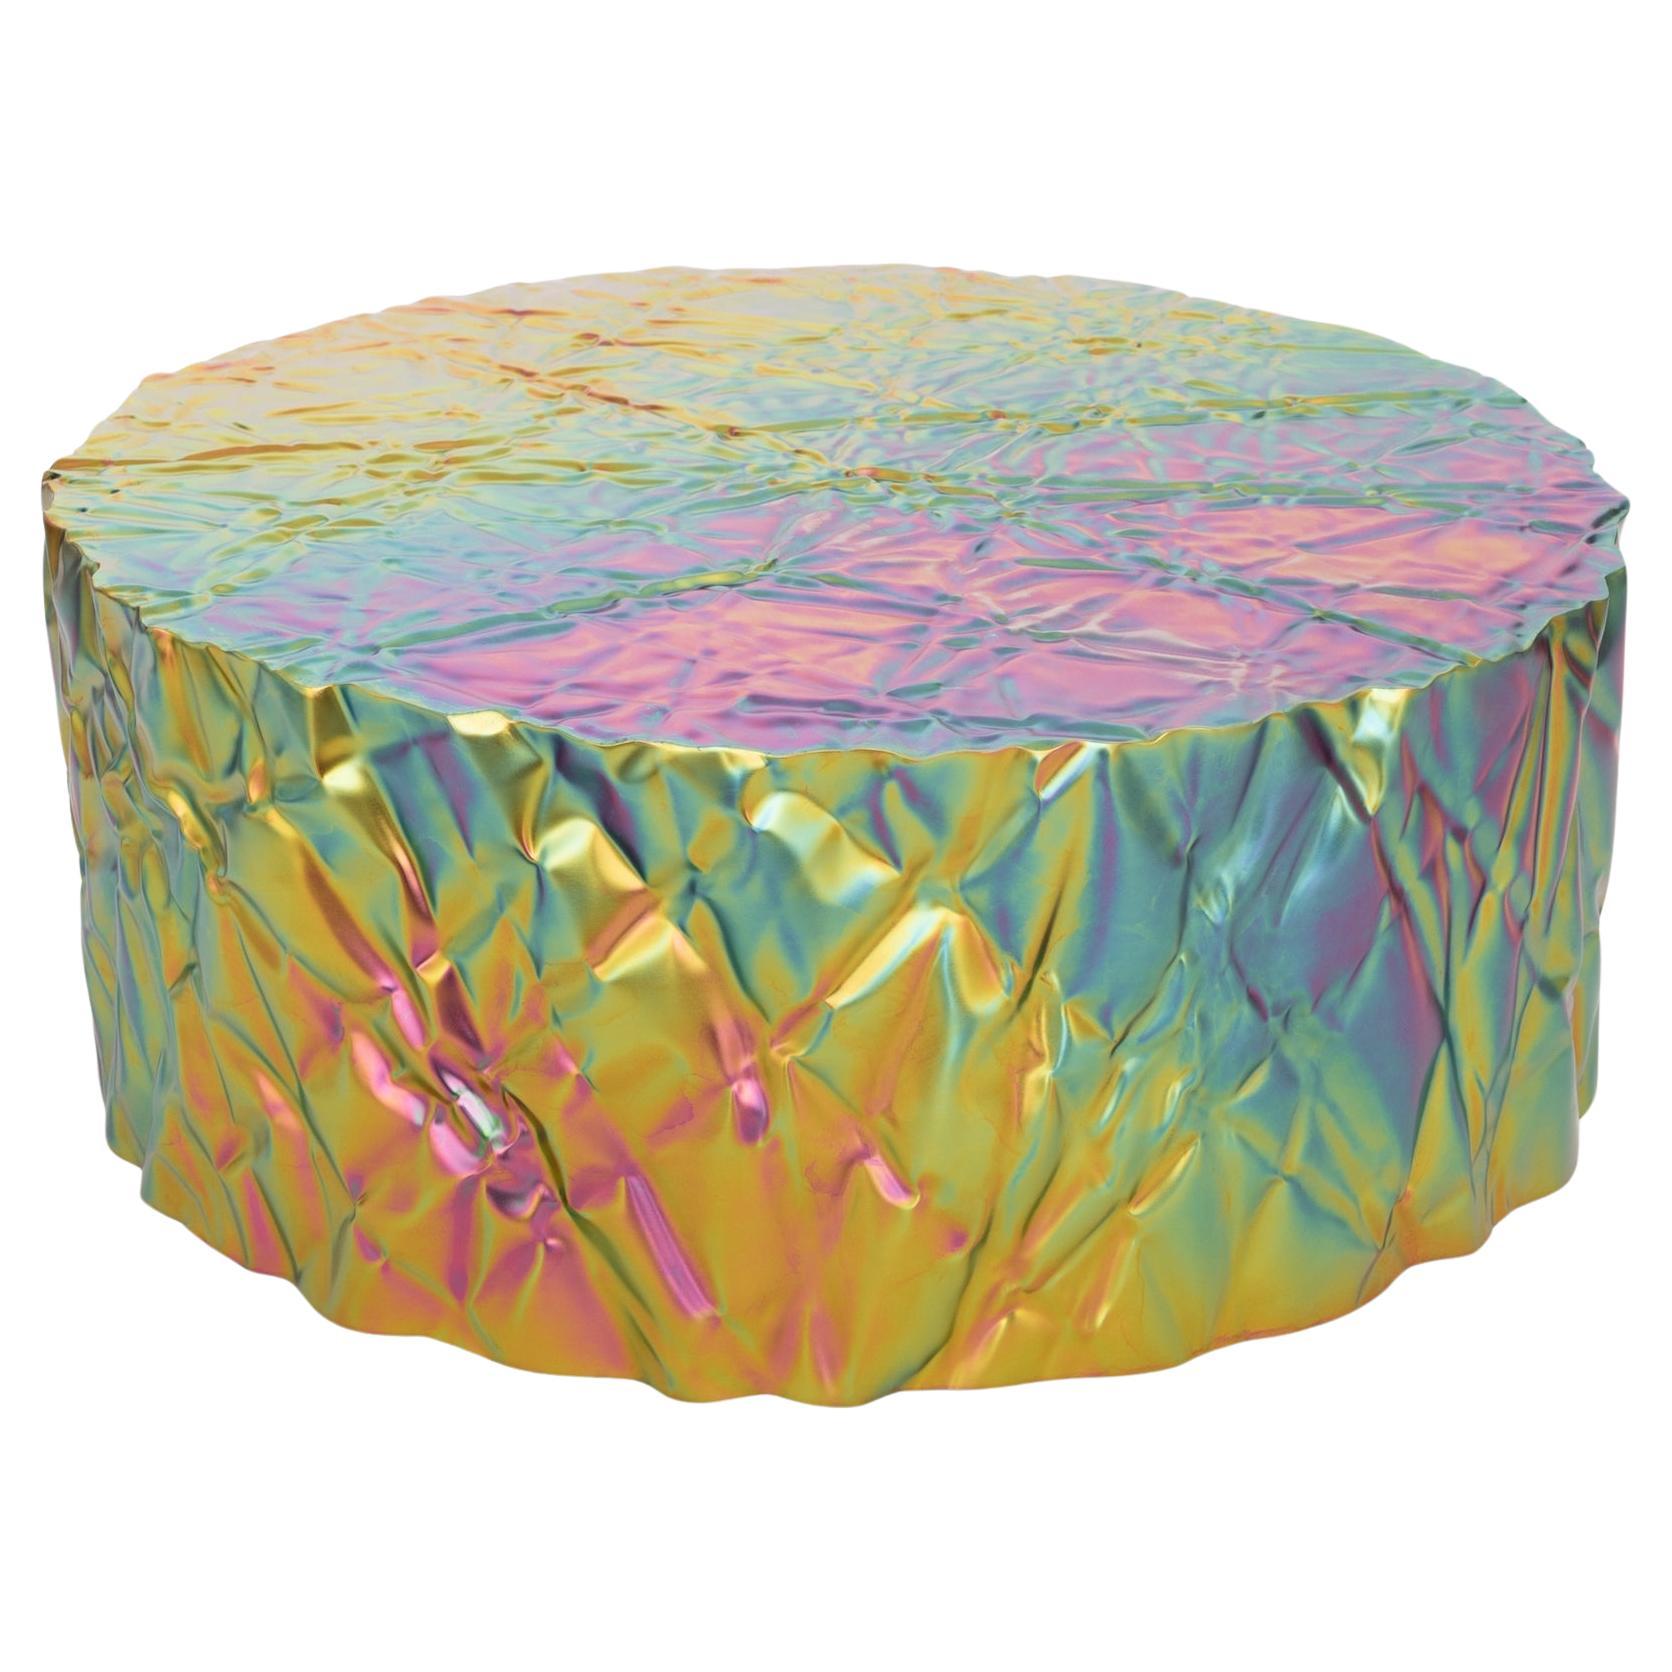 Christopher Prinz “Cylindrical Wrinkled Coffee Table” in Raw Rainbow Iridescent